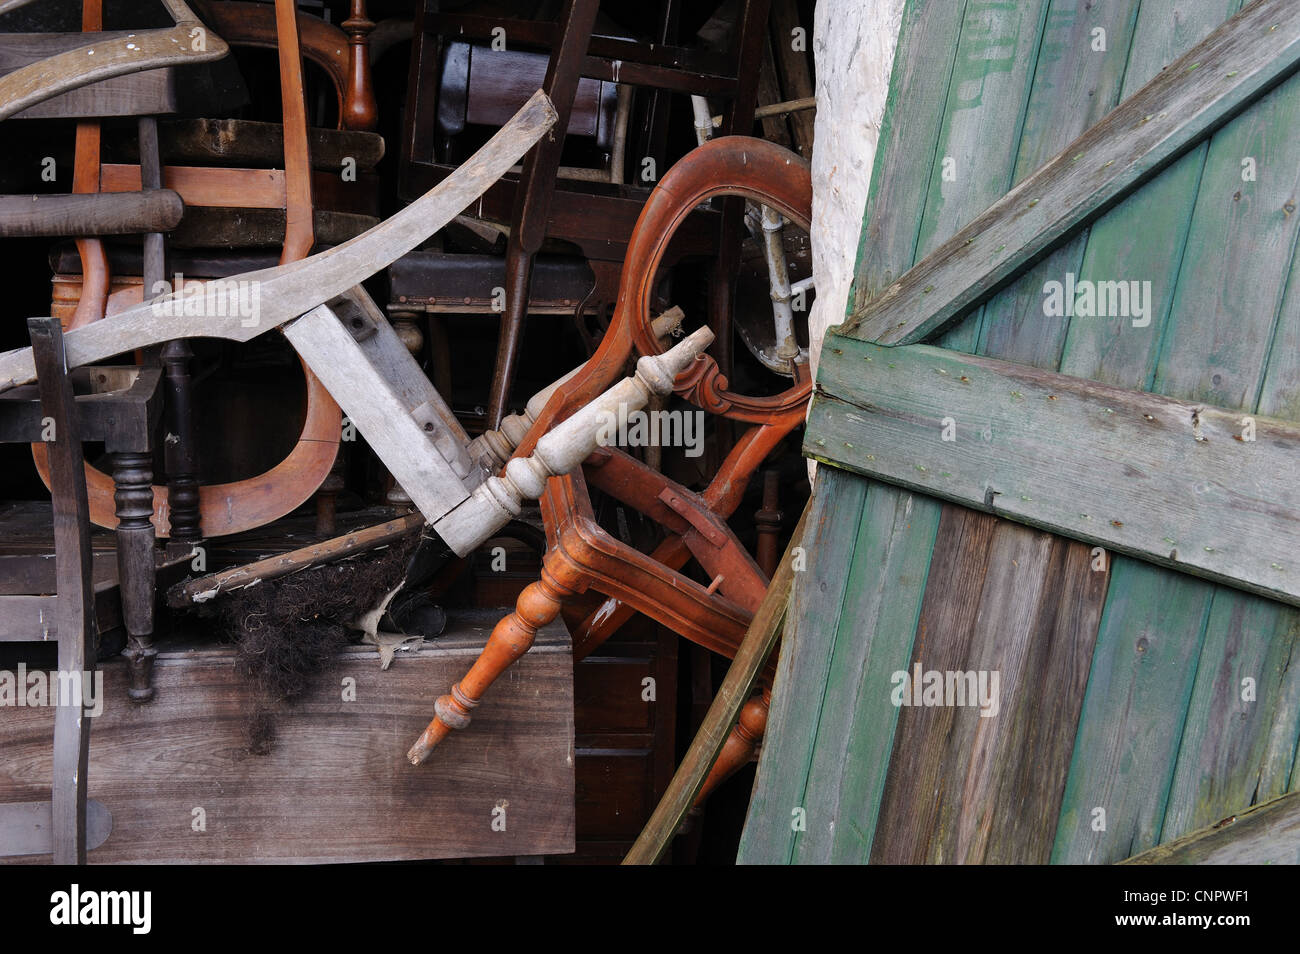 Old wooden dining chairs thrown into a furniture store Stock Photo